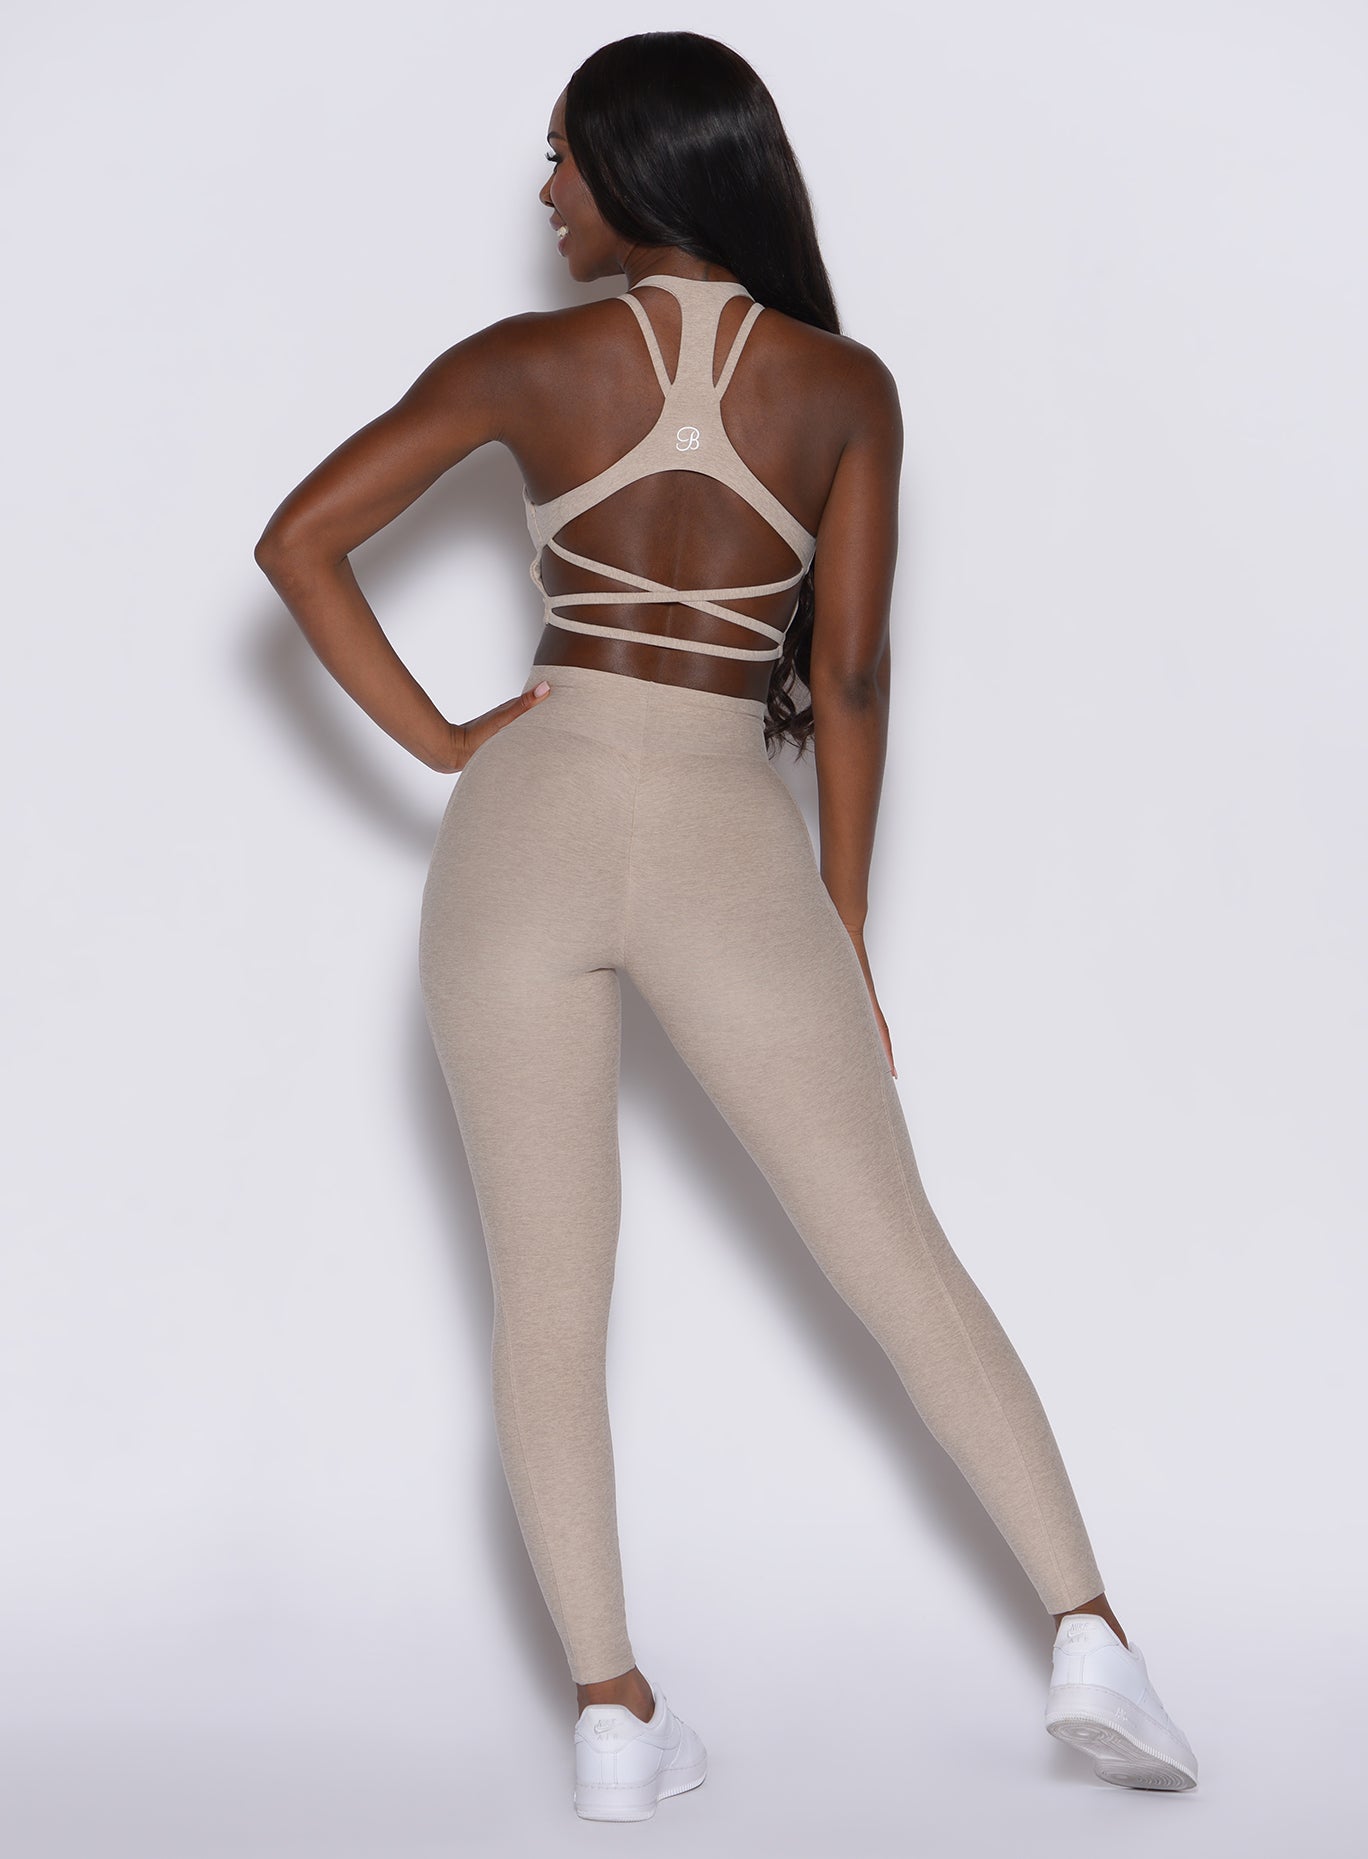 Back profile view of a model wearing our Curves leggings in taupe color along with the matching sports bra.